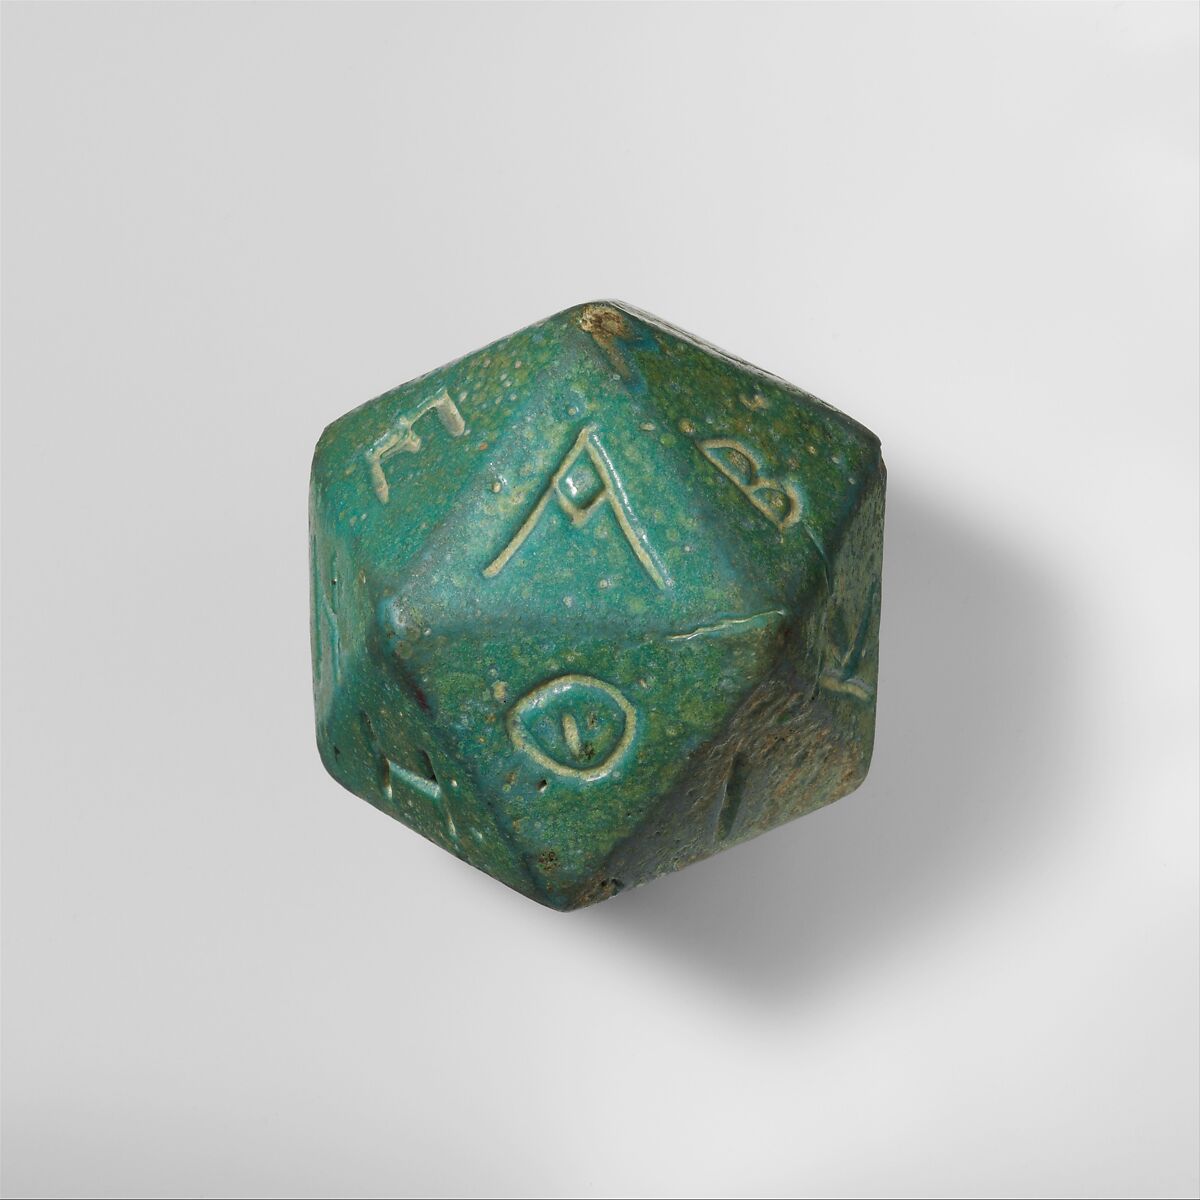 Faience polyhedron inscribed with letters of the Greek alphabet, Faience, Roman 